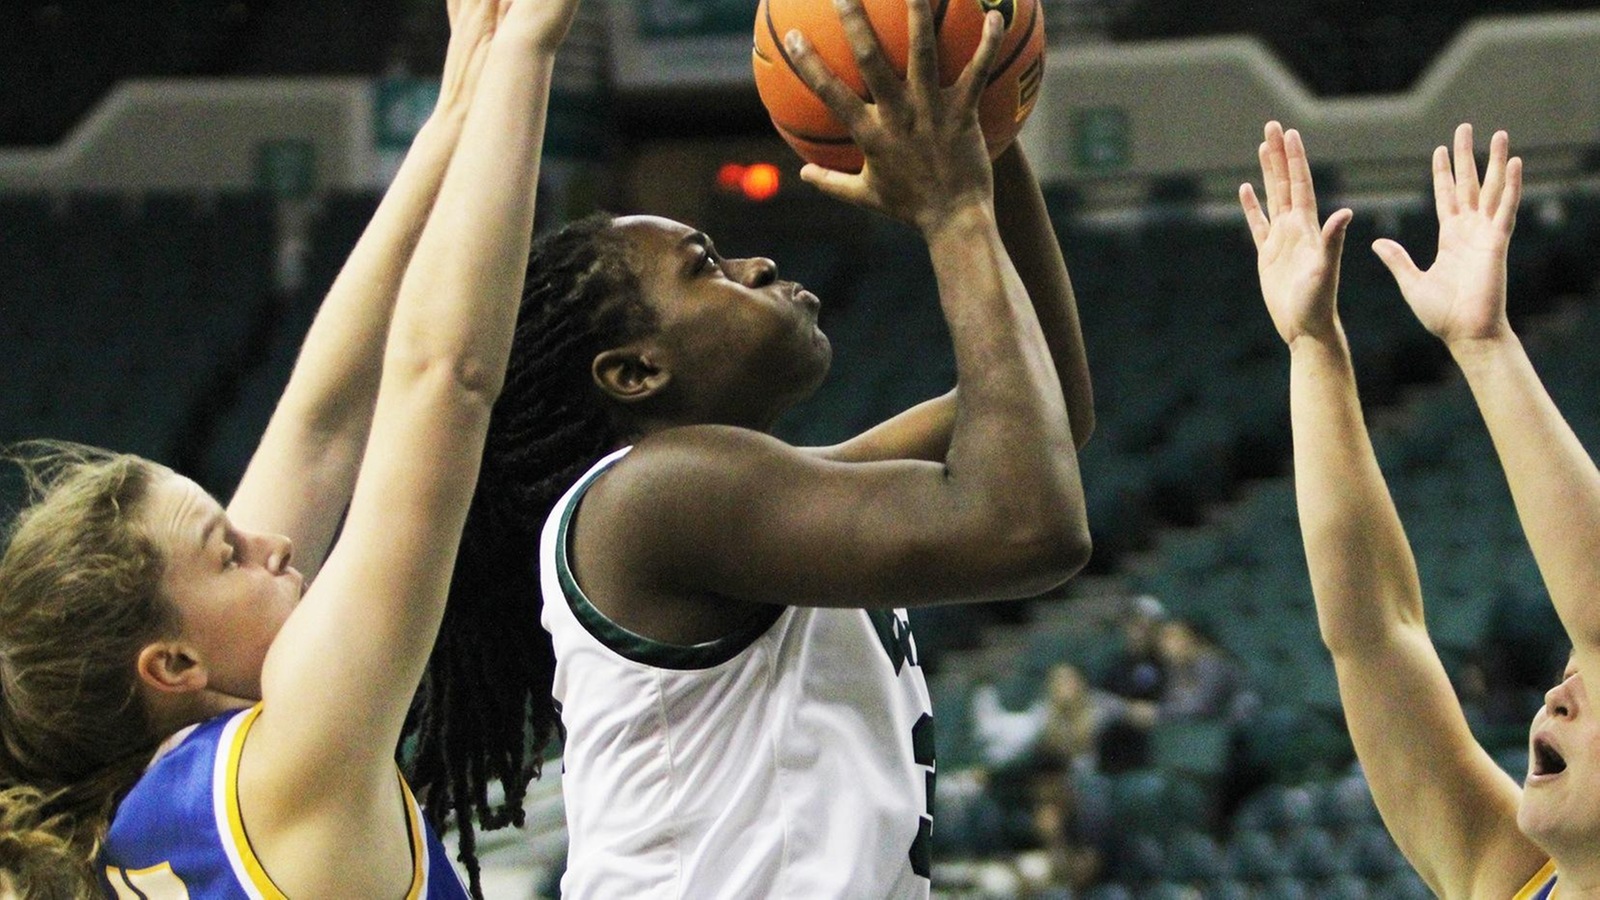 Cleveland State Women’s Basketball Earns 76-43 Exhibition Win Over Ursuline